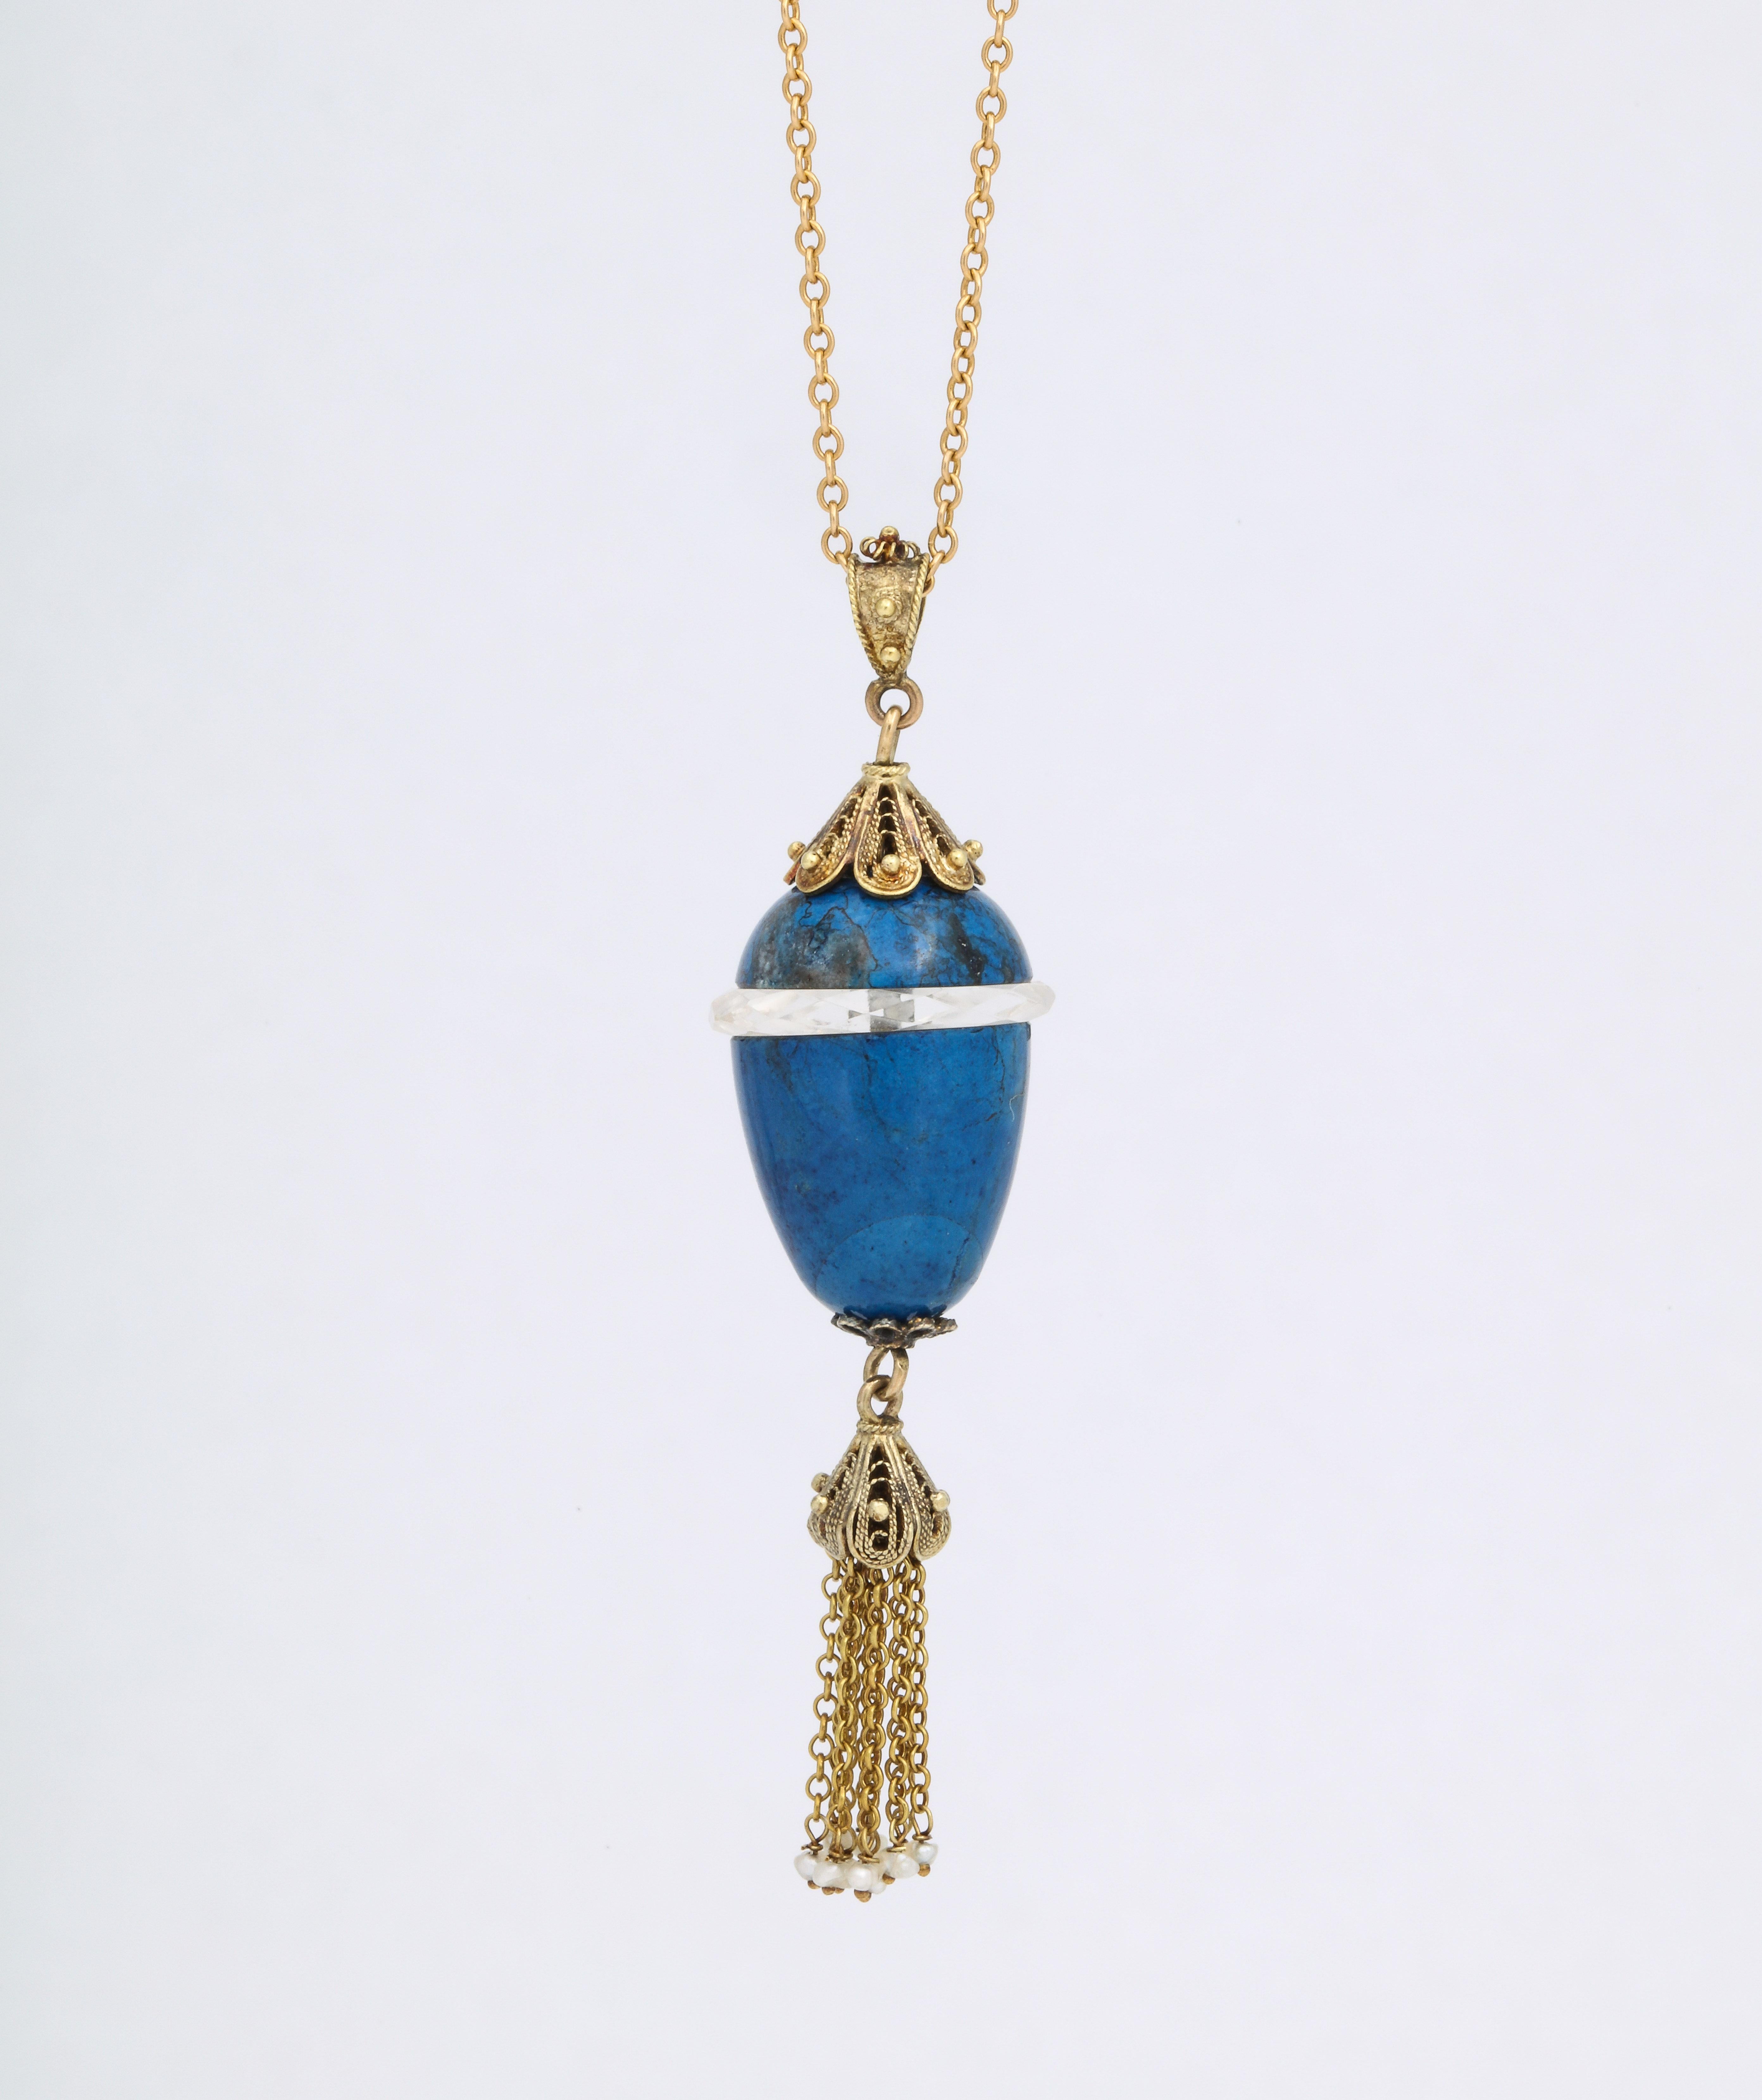 .So much detail is in this delicious color blue sodalite and crystal egg necklace that swings from its 10 Kt chain. A. crystal band is directly at the egg center. The top cap is a dainty filigree with gold beads. A similar accent is at the bottom of